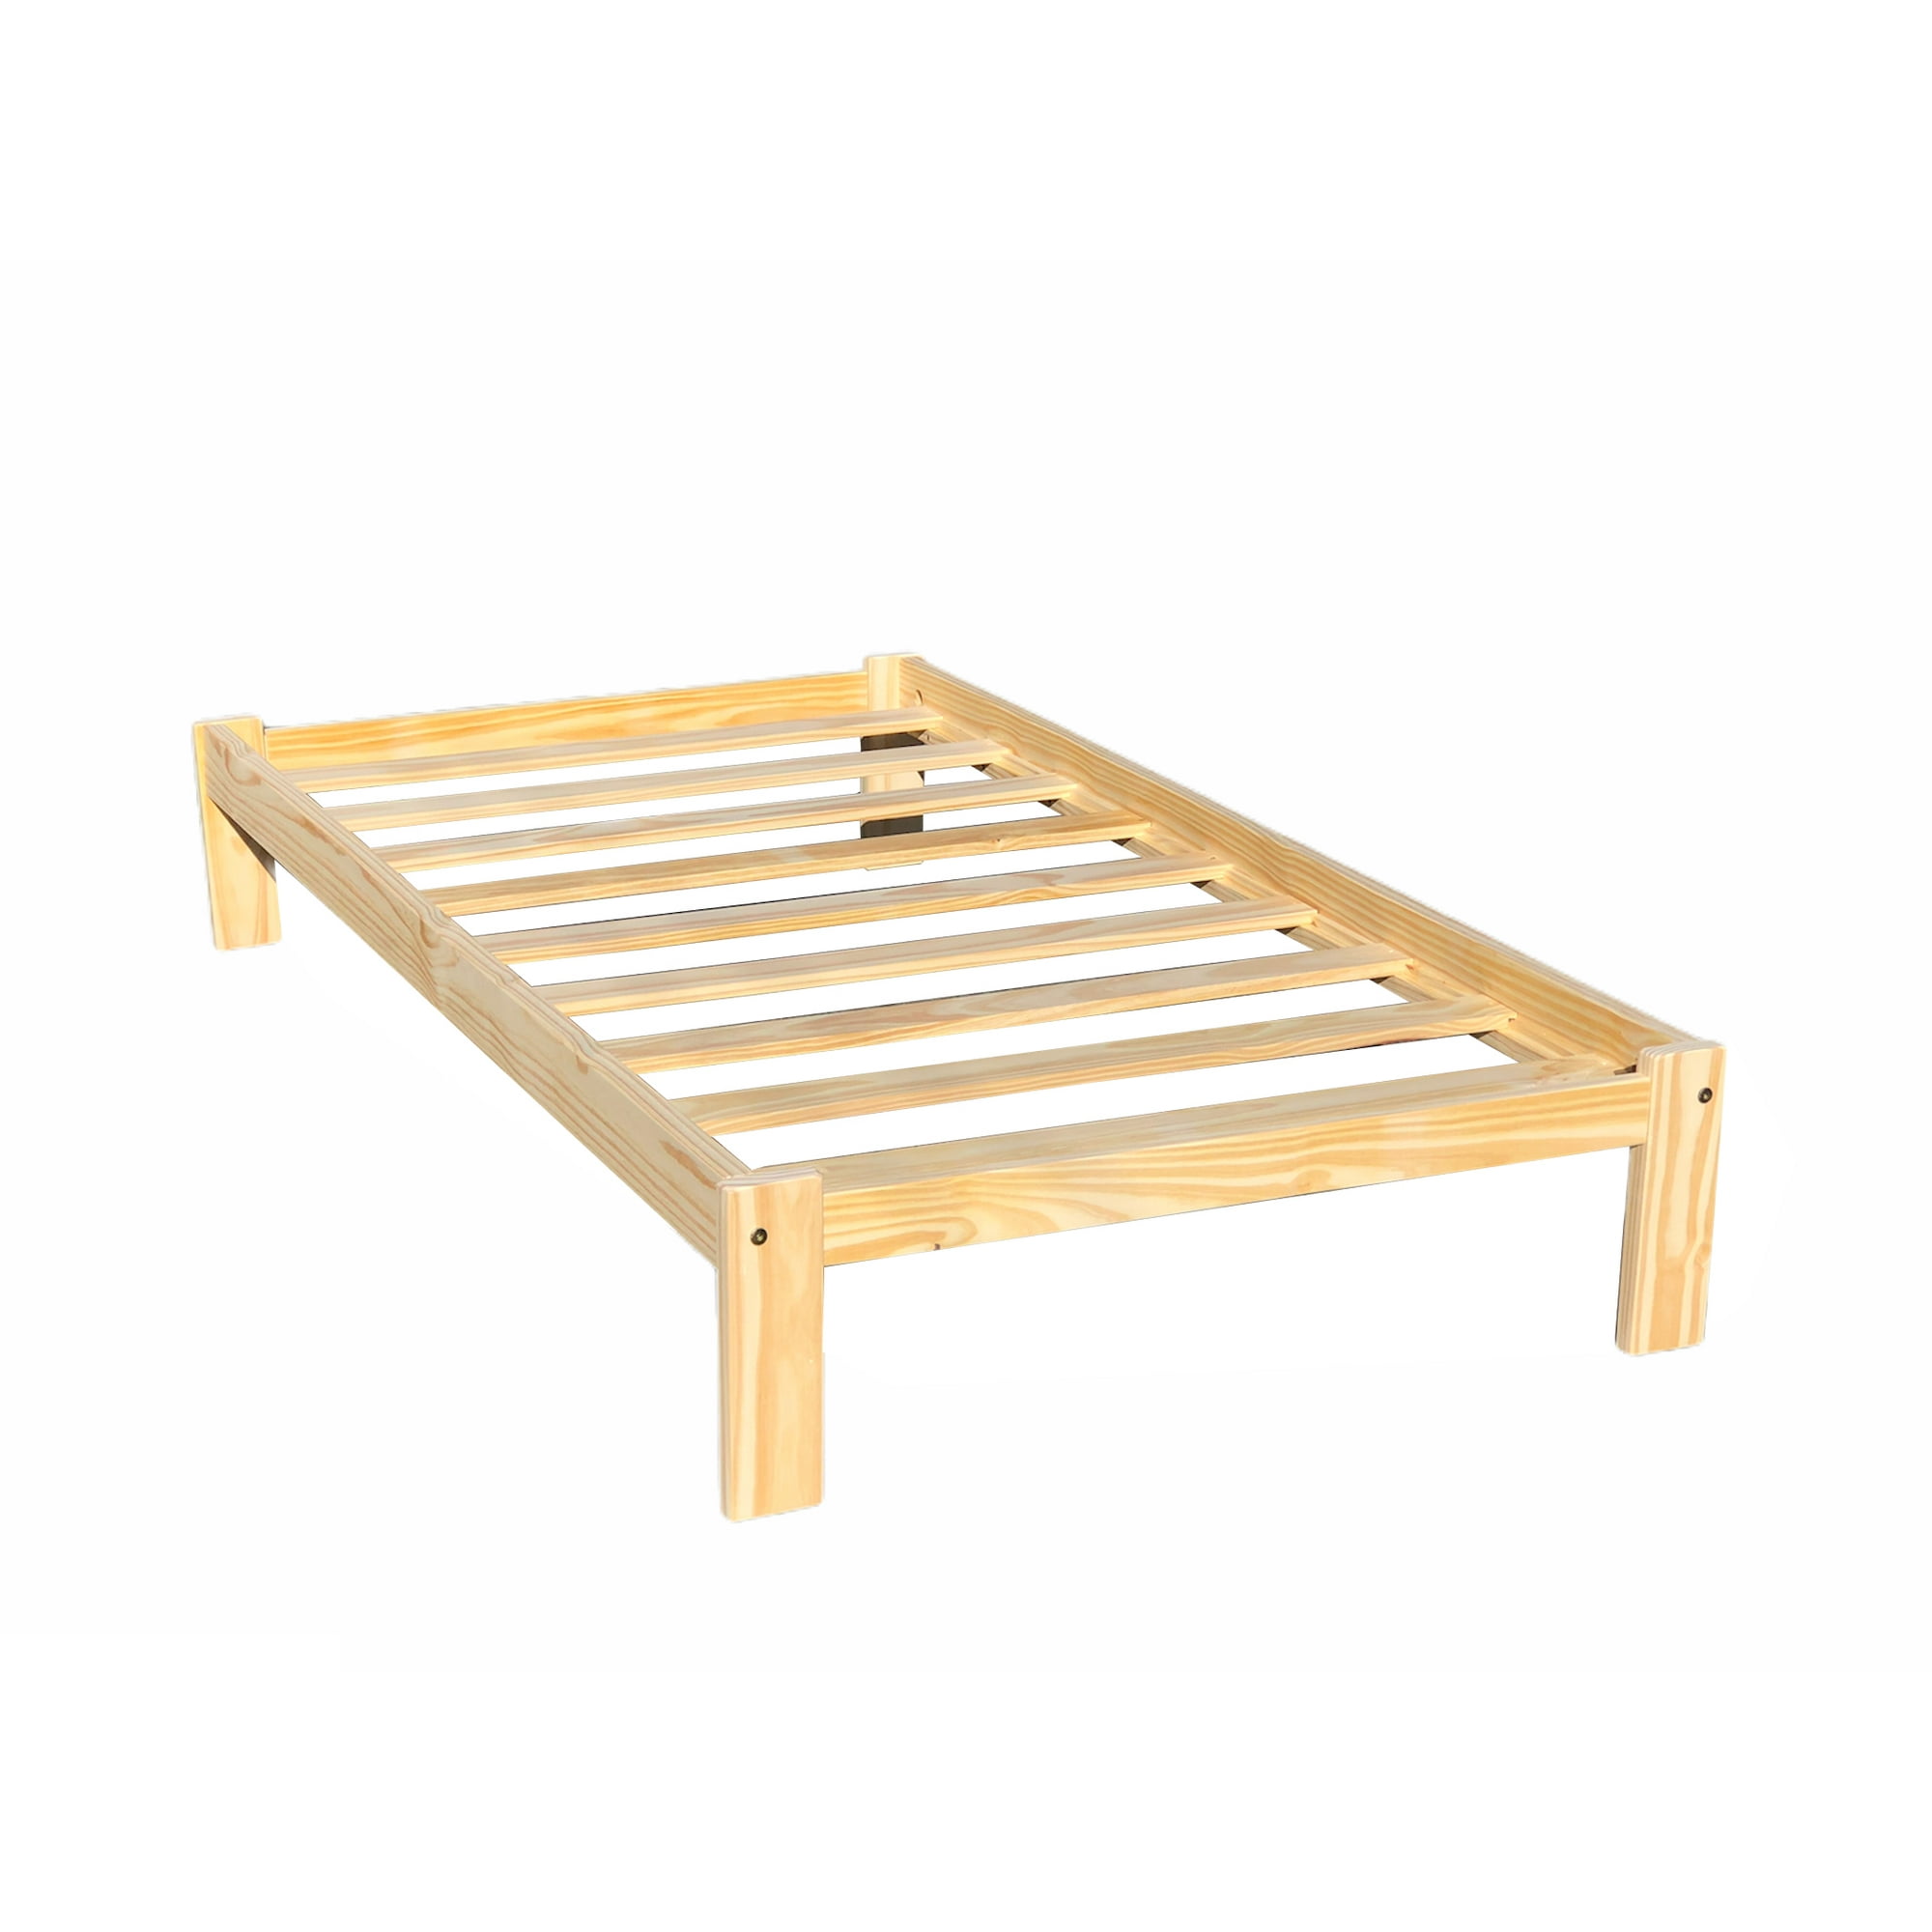 Alaska Wooden Platform Bed Twin Size, Measurements For A Twin Size Bed Frame